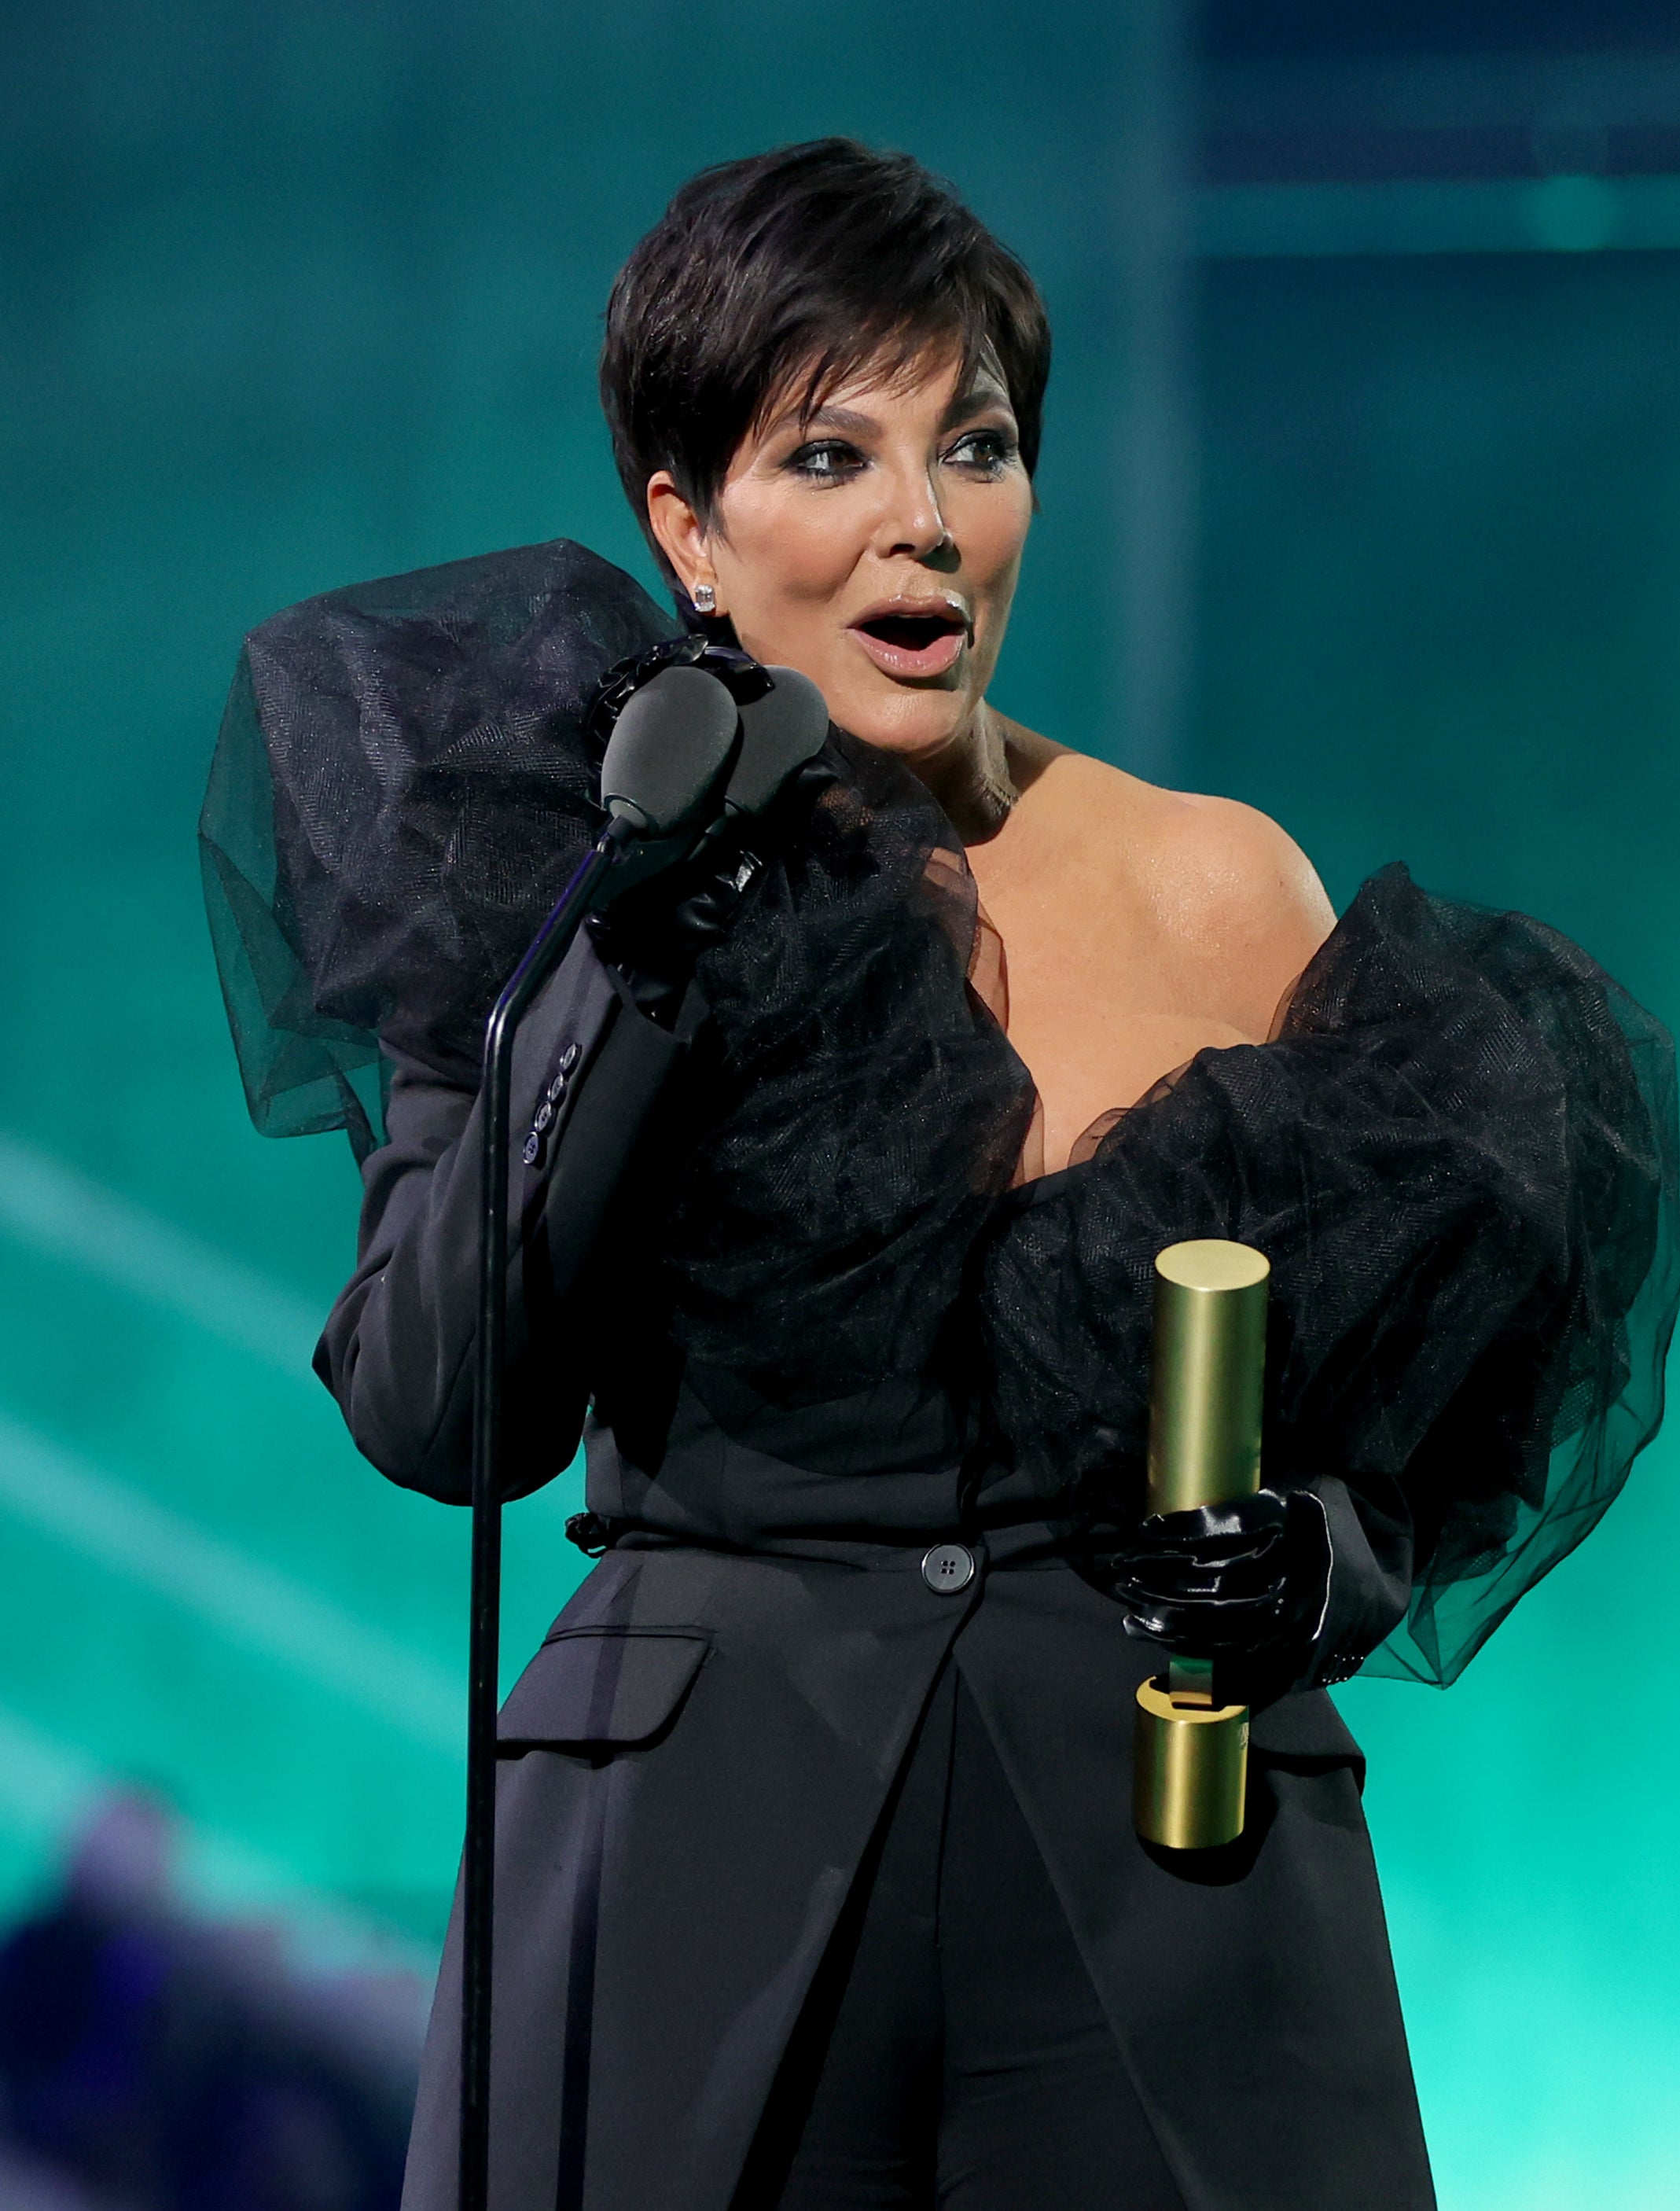 Close-up of Kris onstage at a microphone holding an award